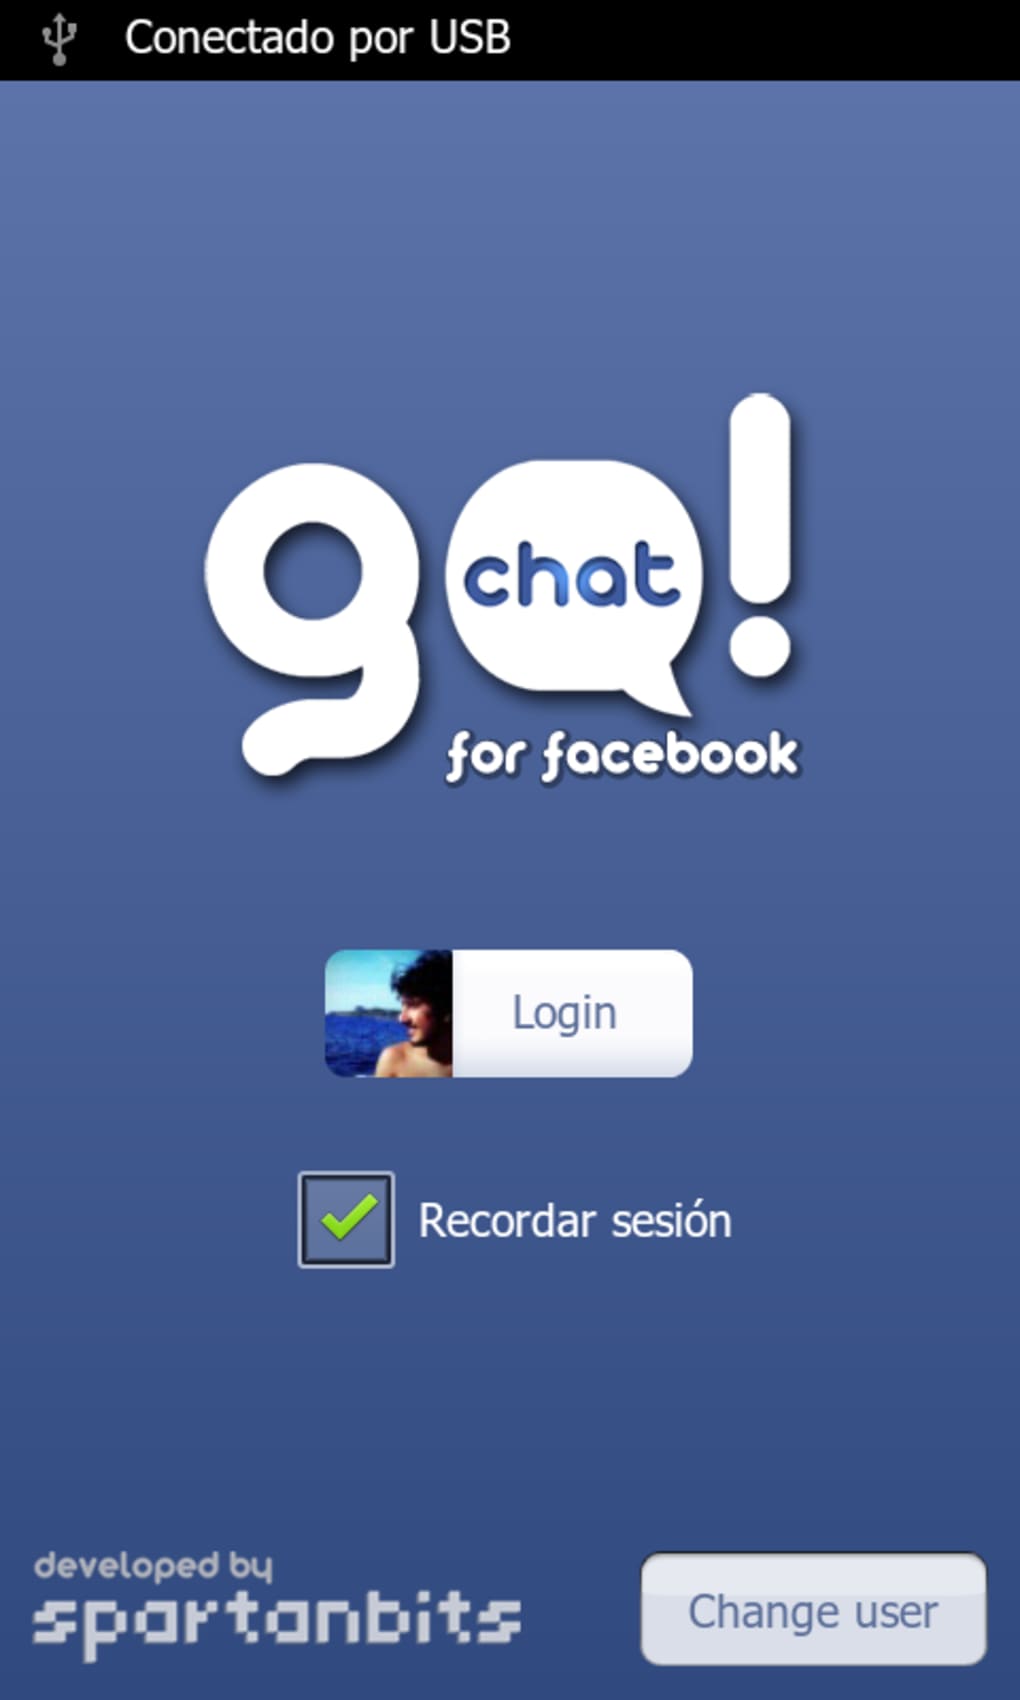 To go chat app